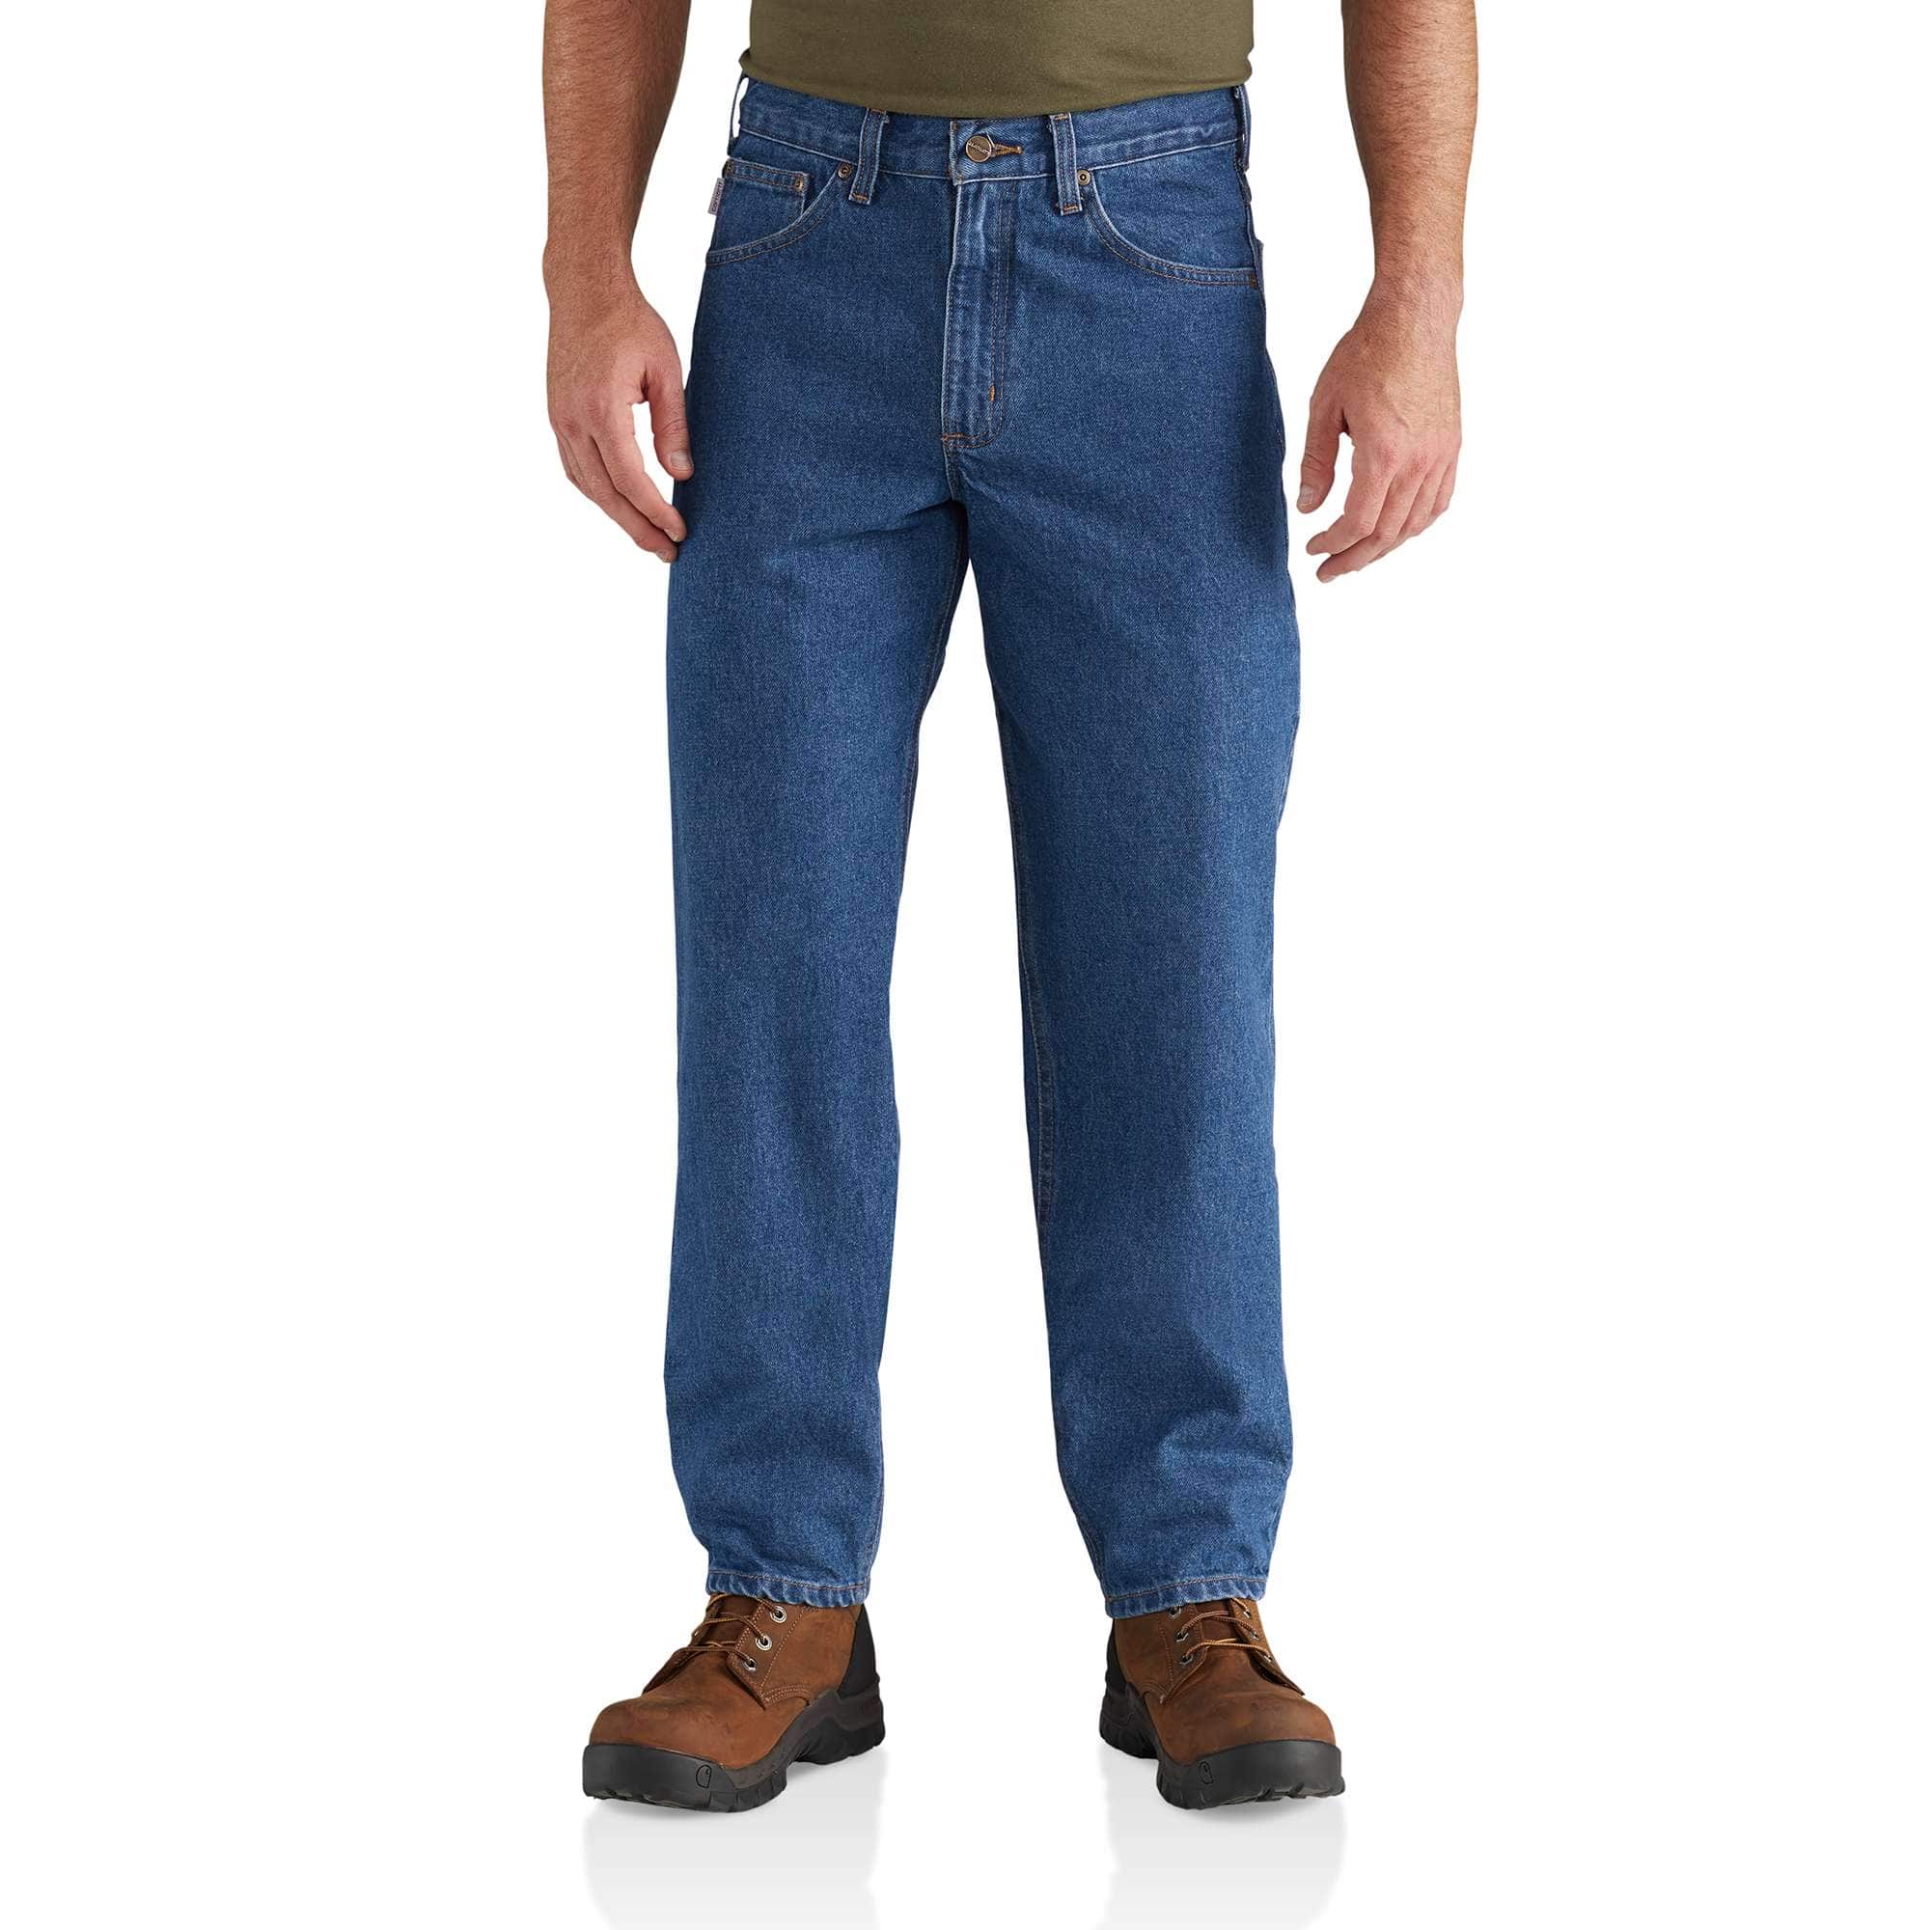 Men's Relaxed Fit Tapered Leg Jean B17 